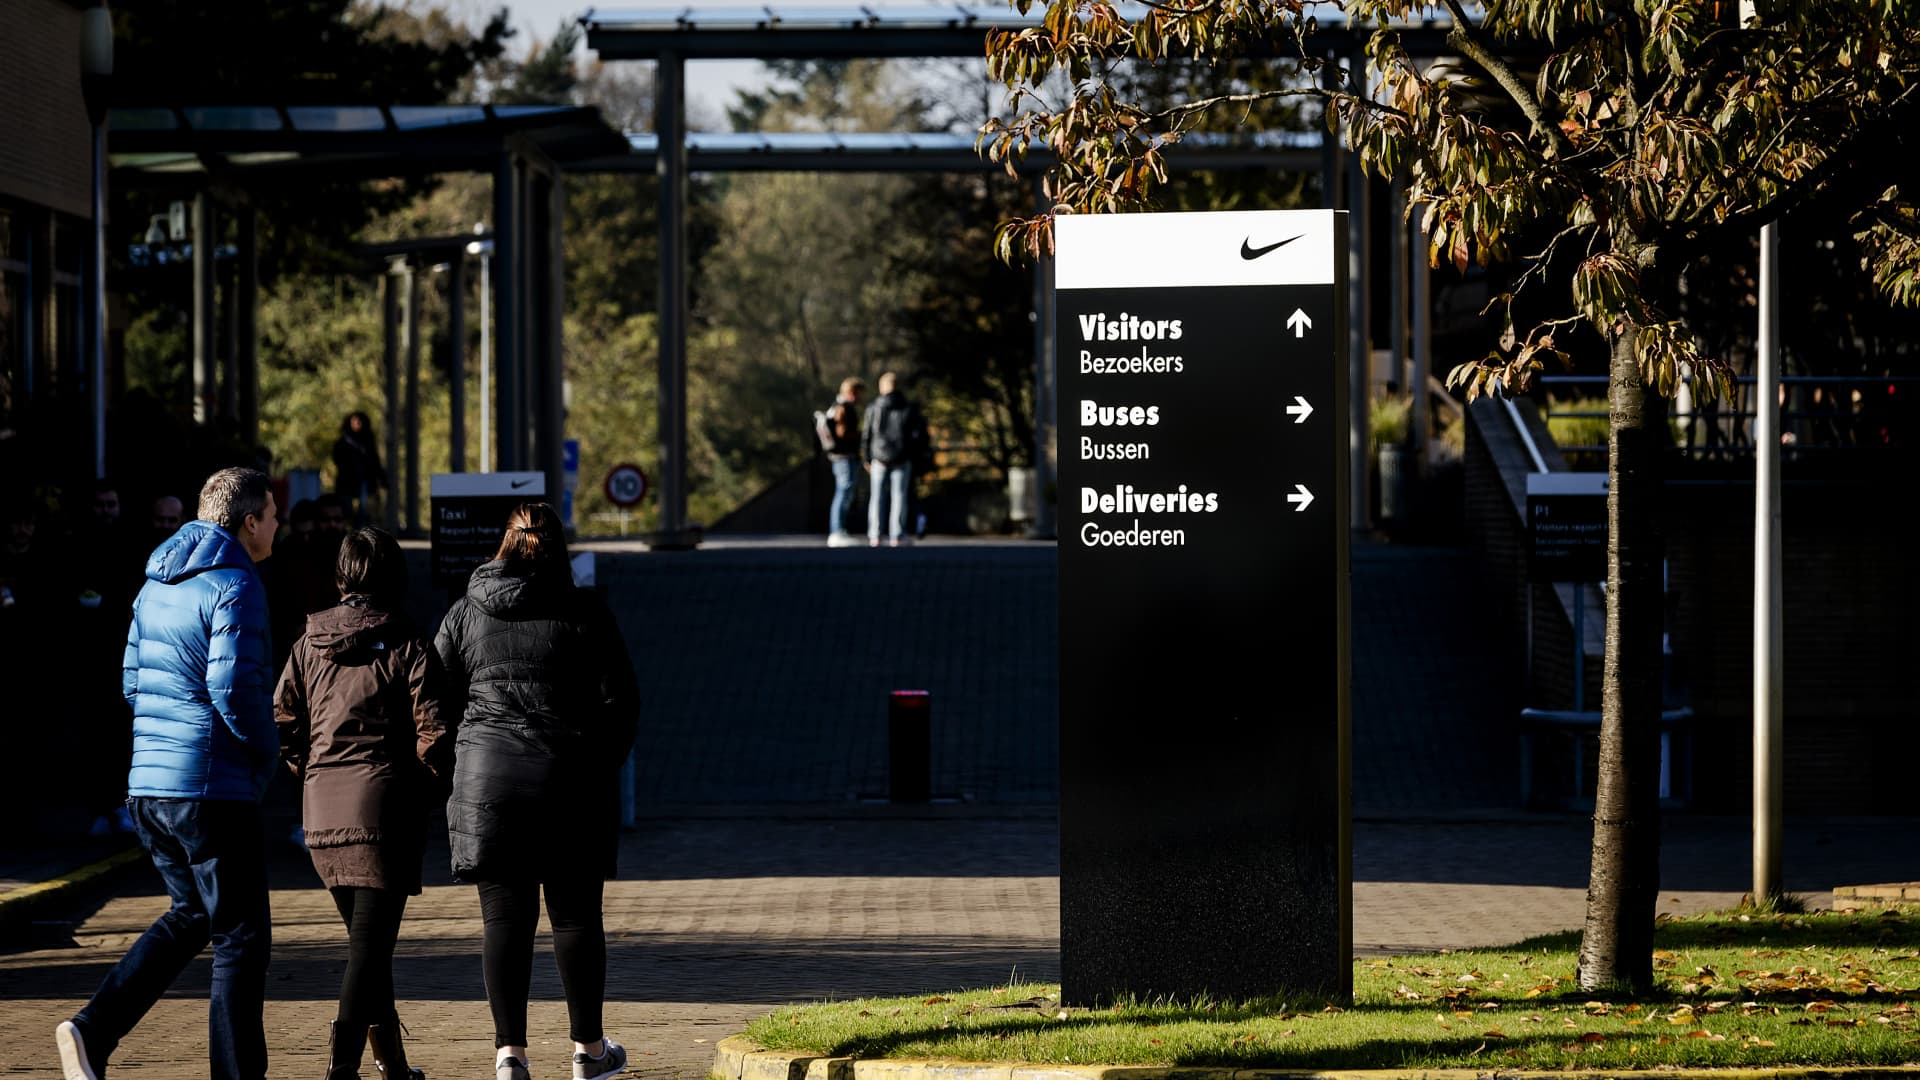 A picture taken on November 7, 2017 shows people arriving at the headquarters of Nike Europe in Hilversum.